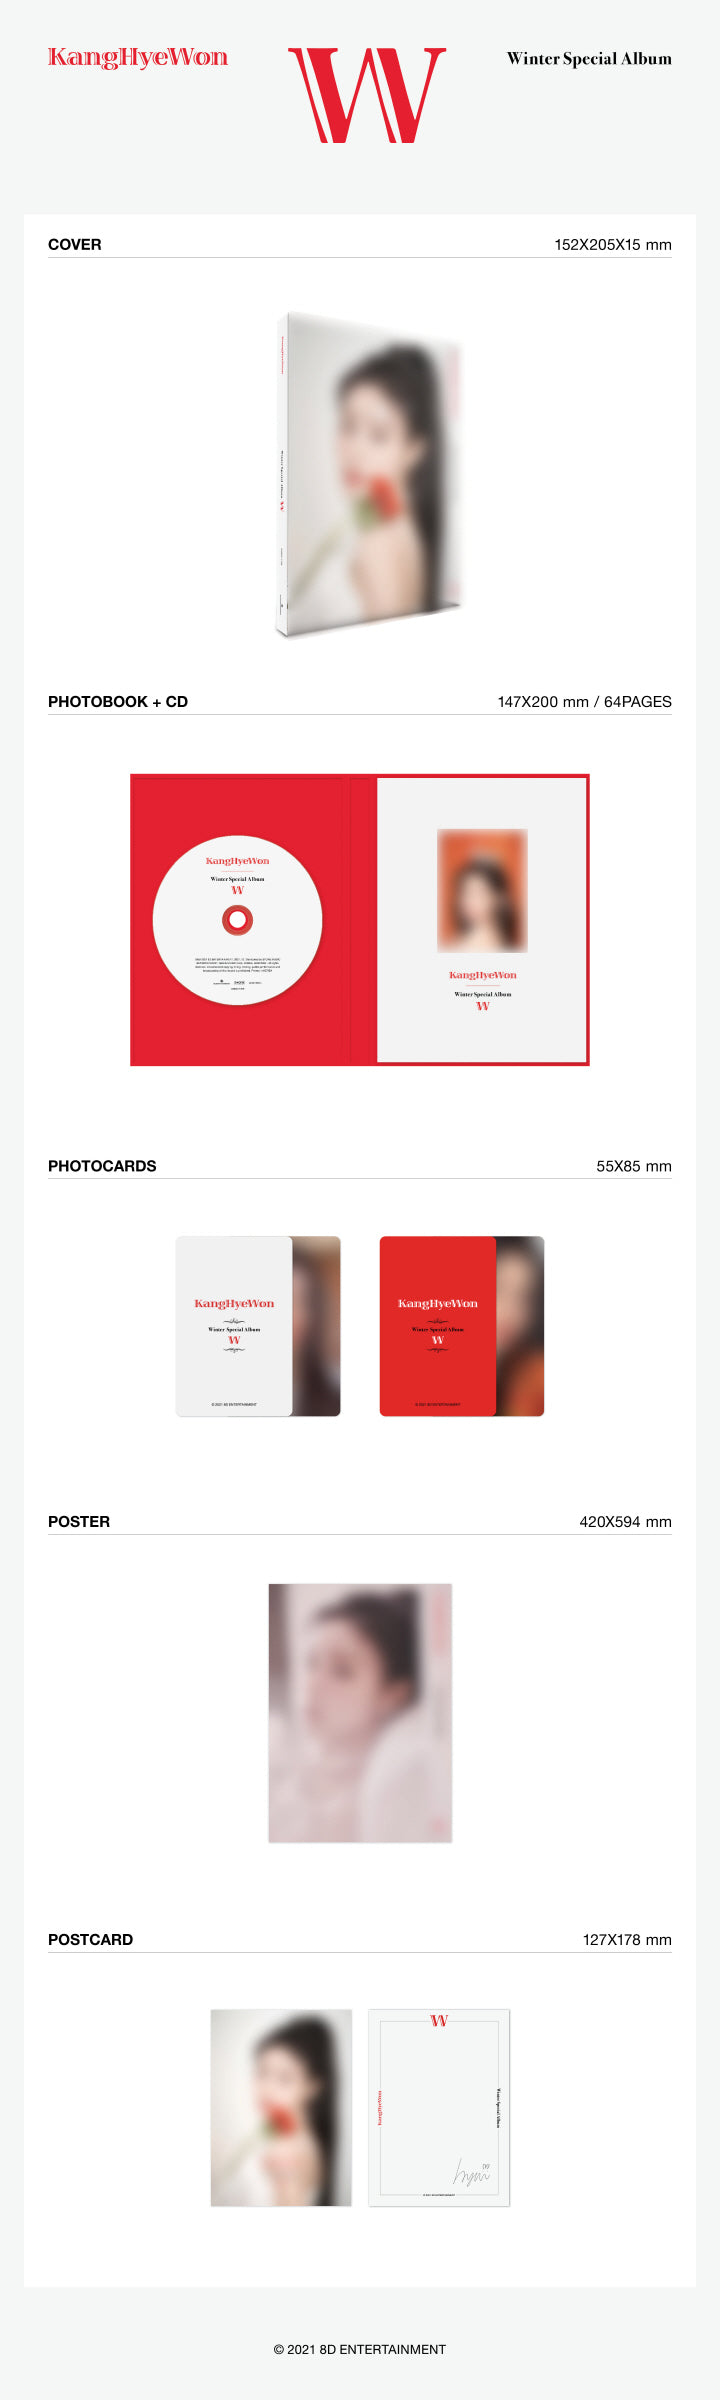 1 CD
1 Photo Book (64 pages)
1 Photo Card
1 Postcard